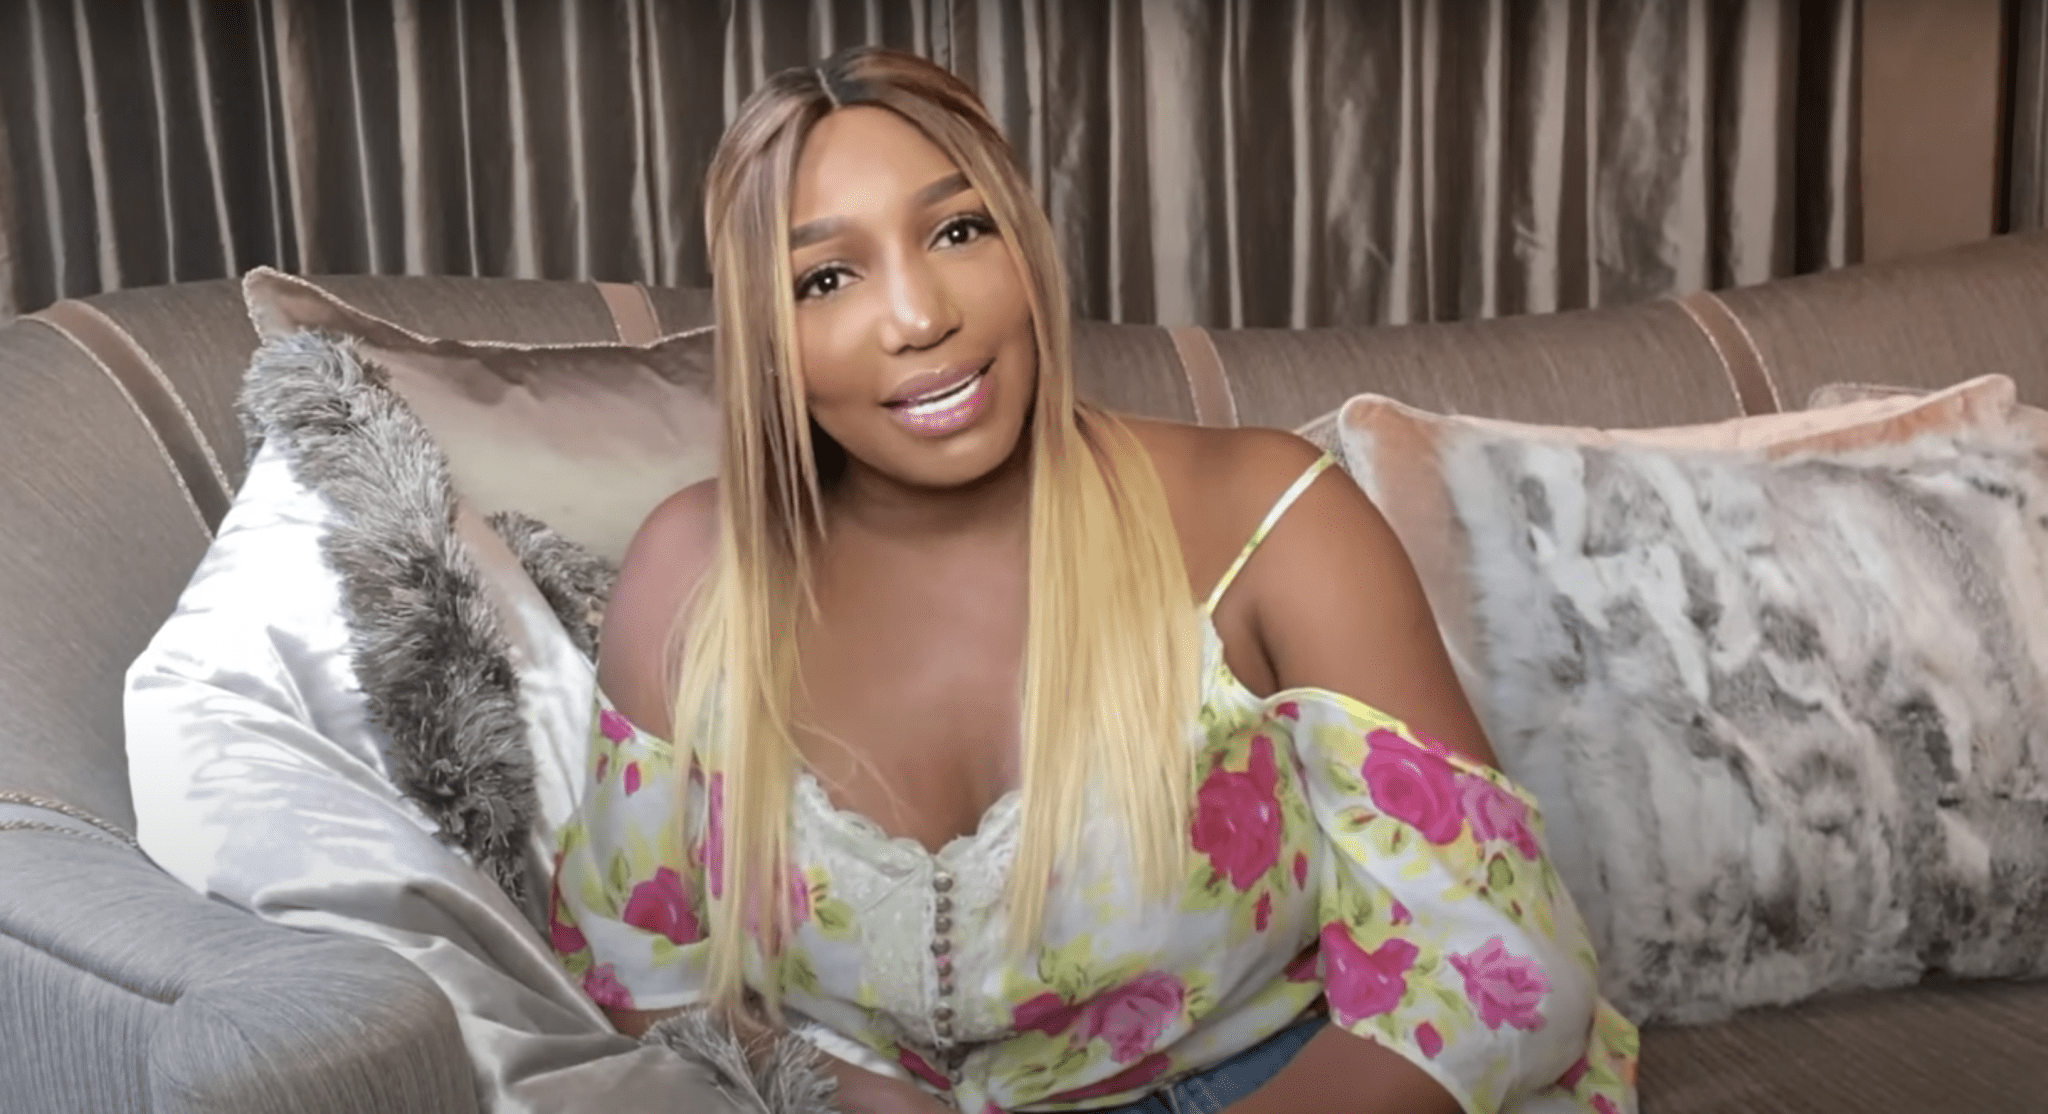 nene-leakes-looks-amazing-in-her-latest-photos-from-the-linnethia-lounge